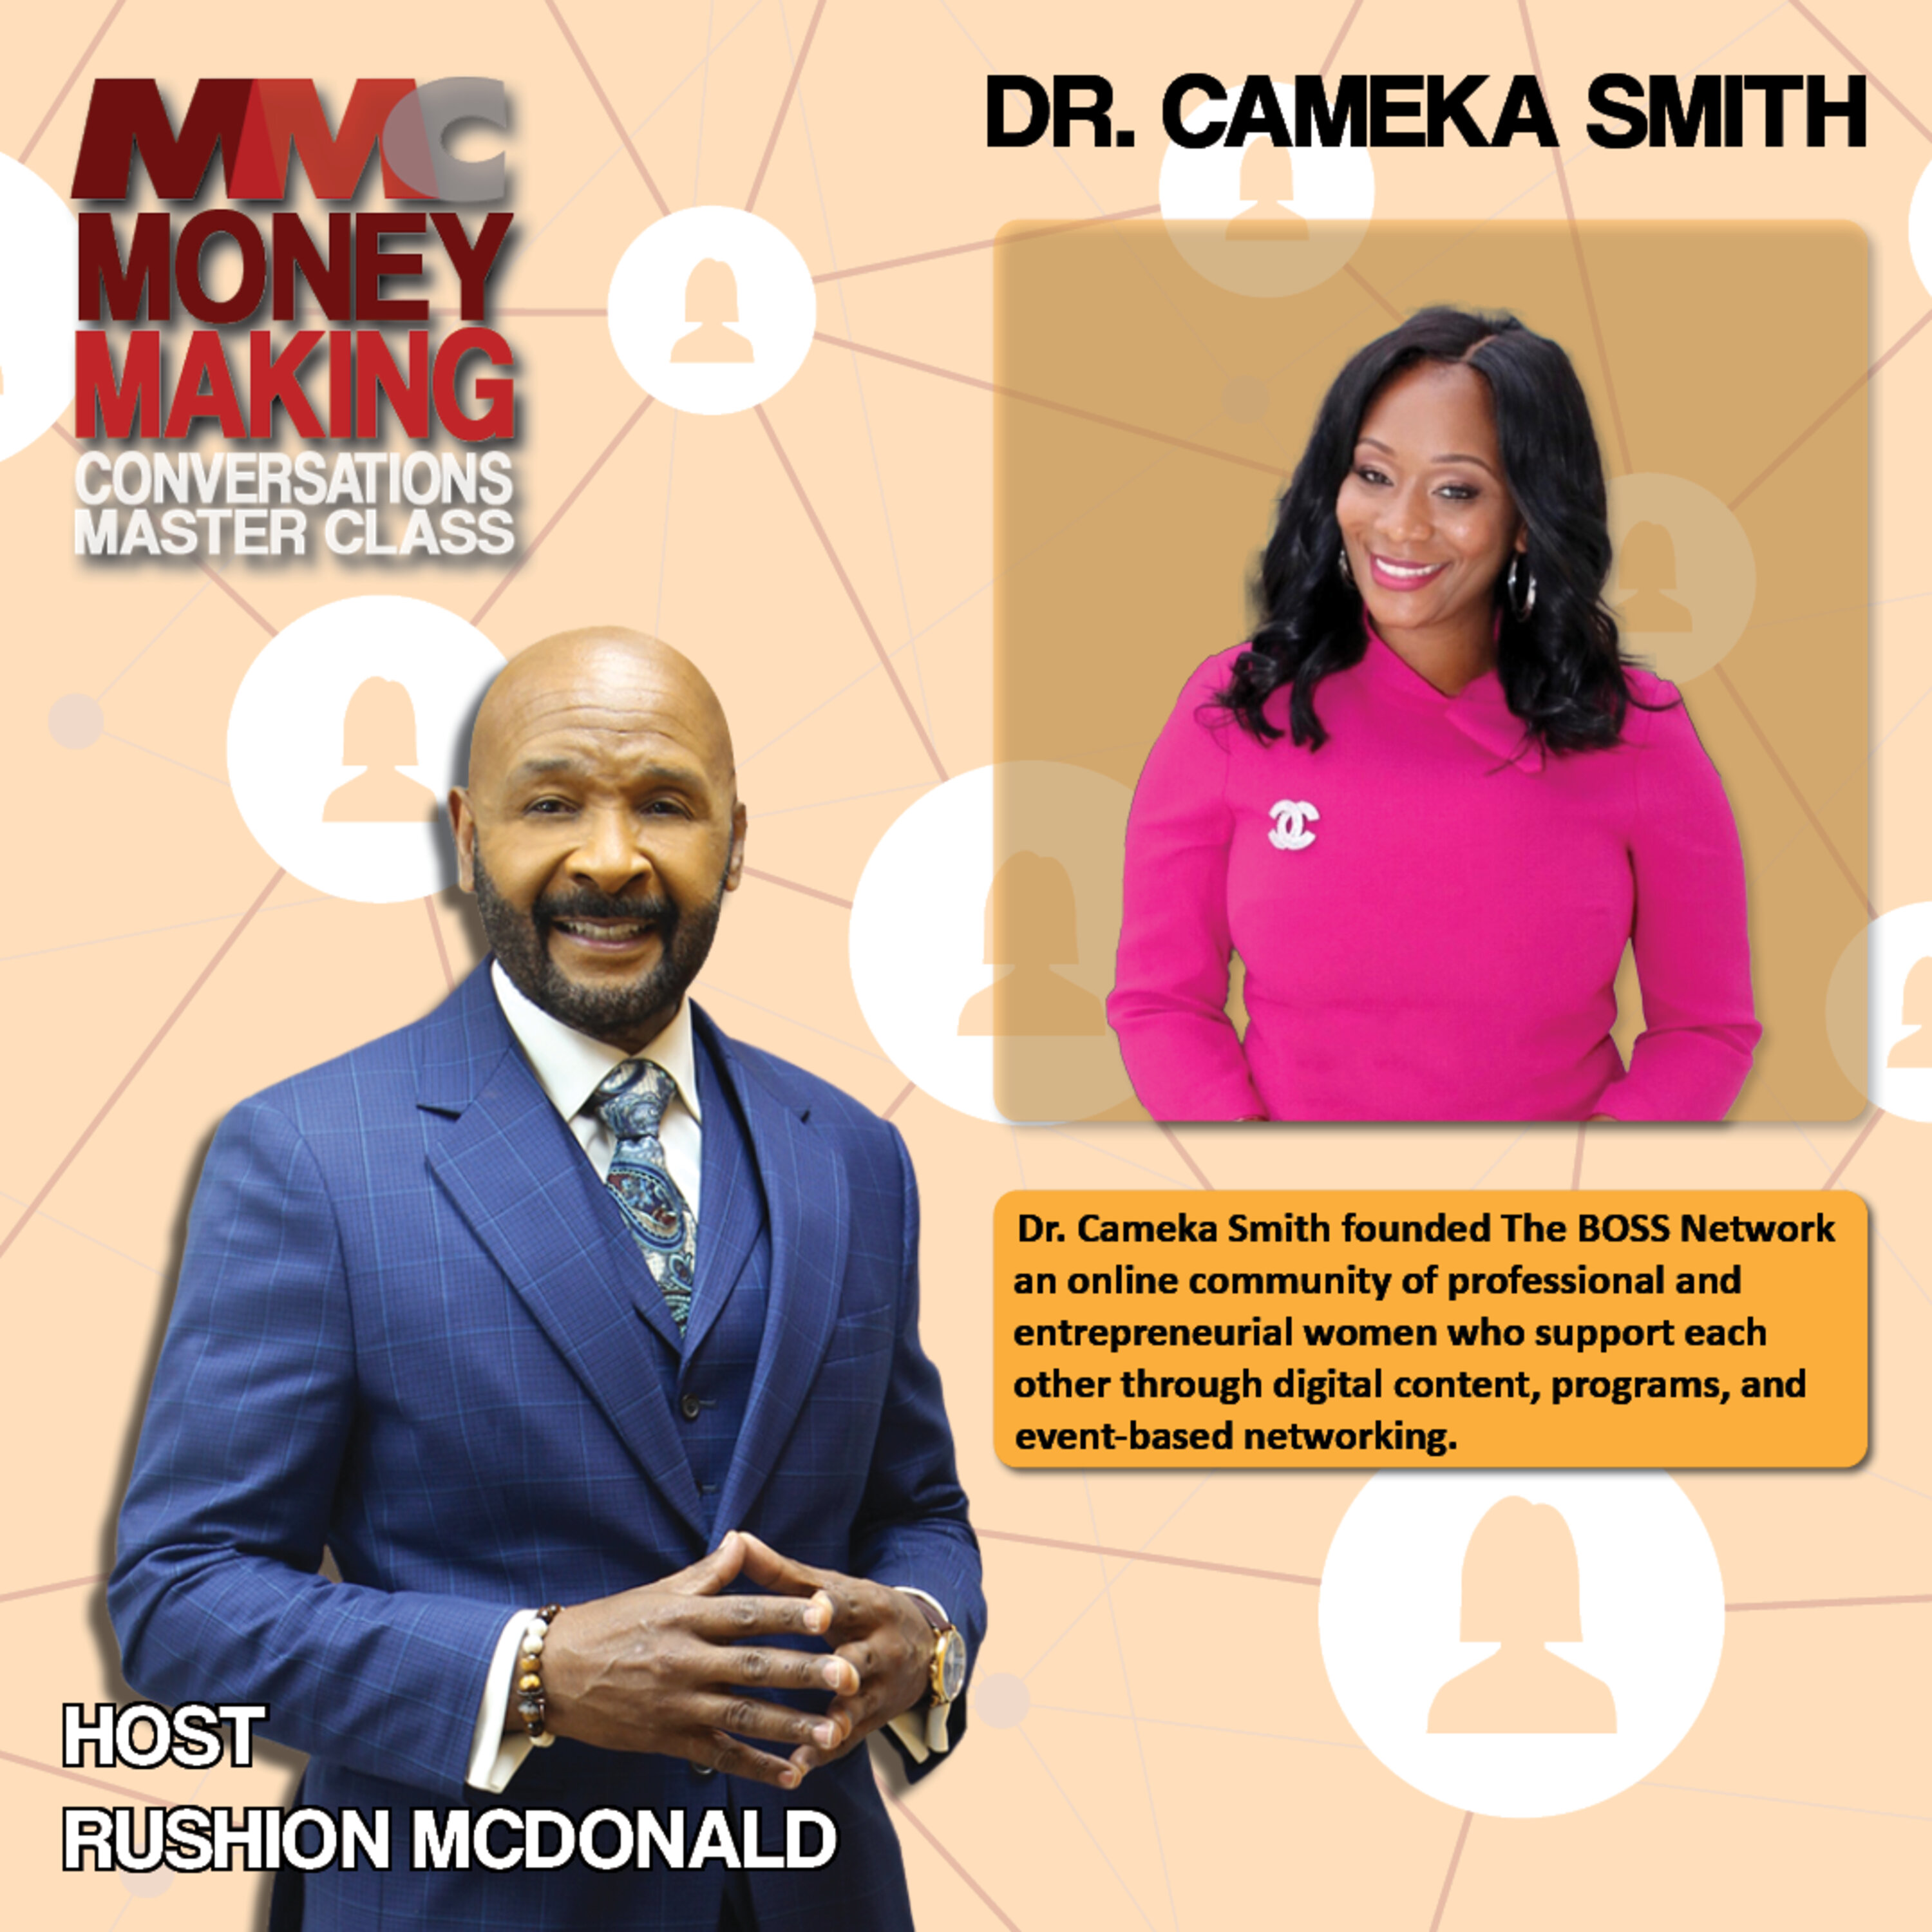 Dr. Cameka Smith, Founder of The BOSS Network, a community of over 200K professional and entrepreneurial women.